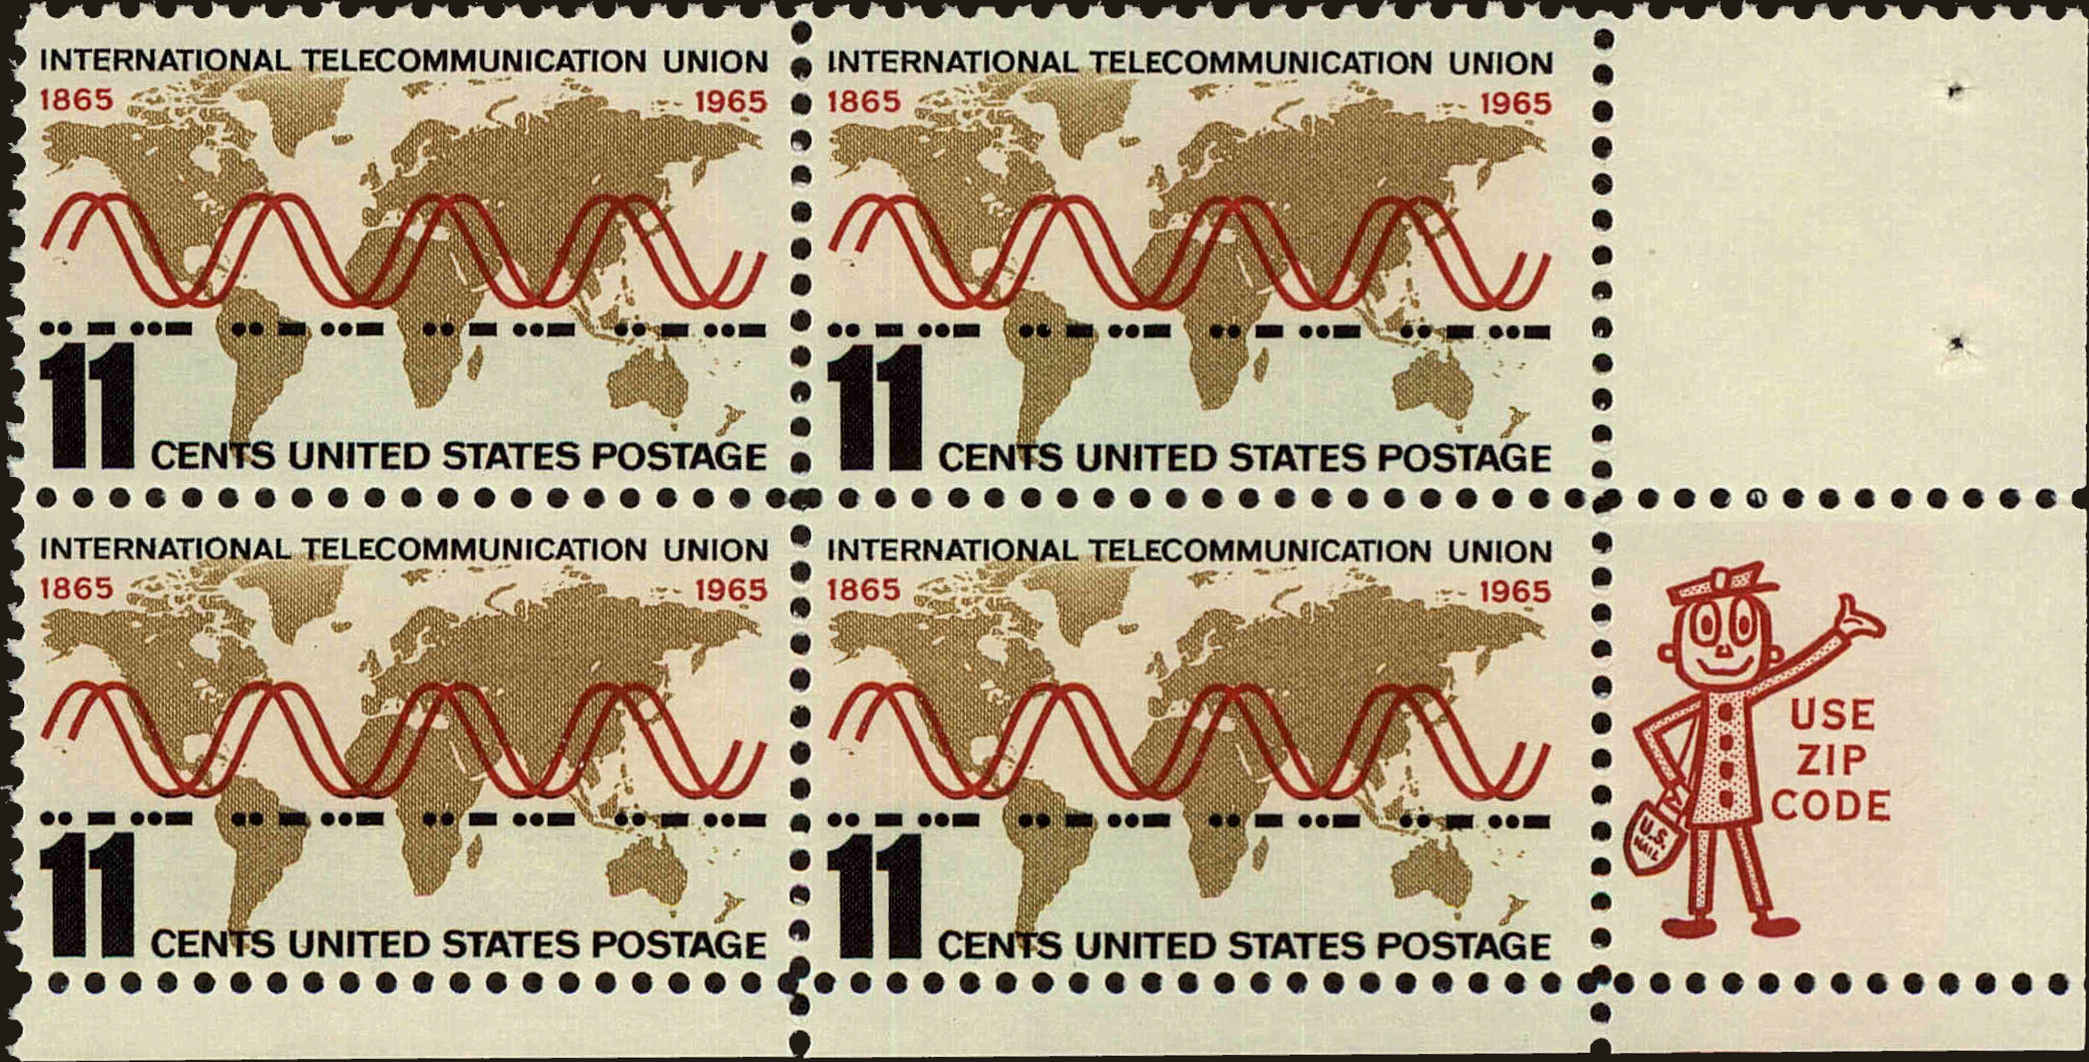 Front view of United States 1274 collectors stamp